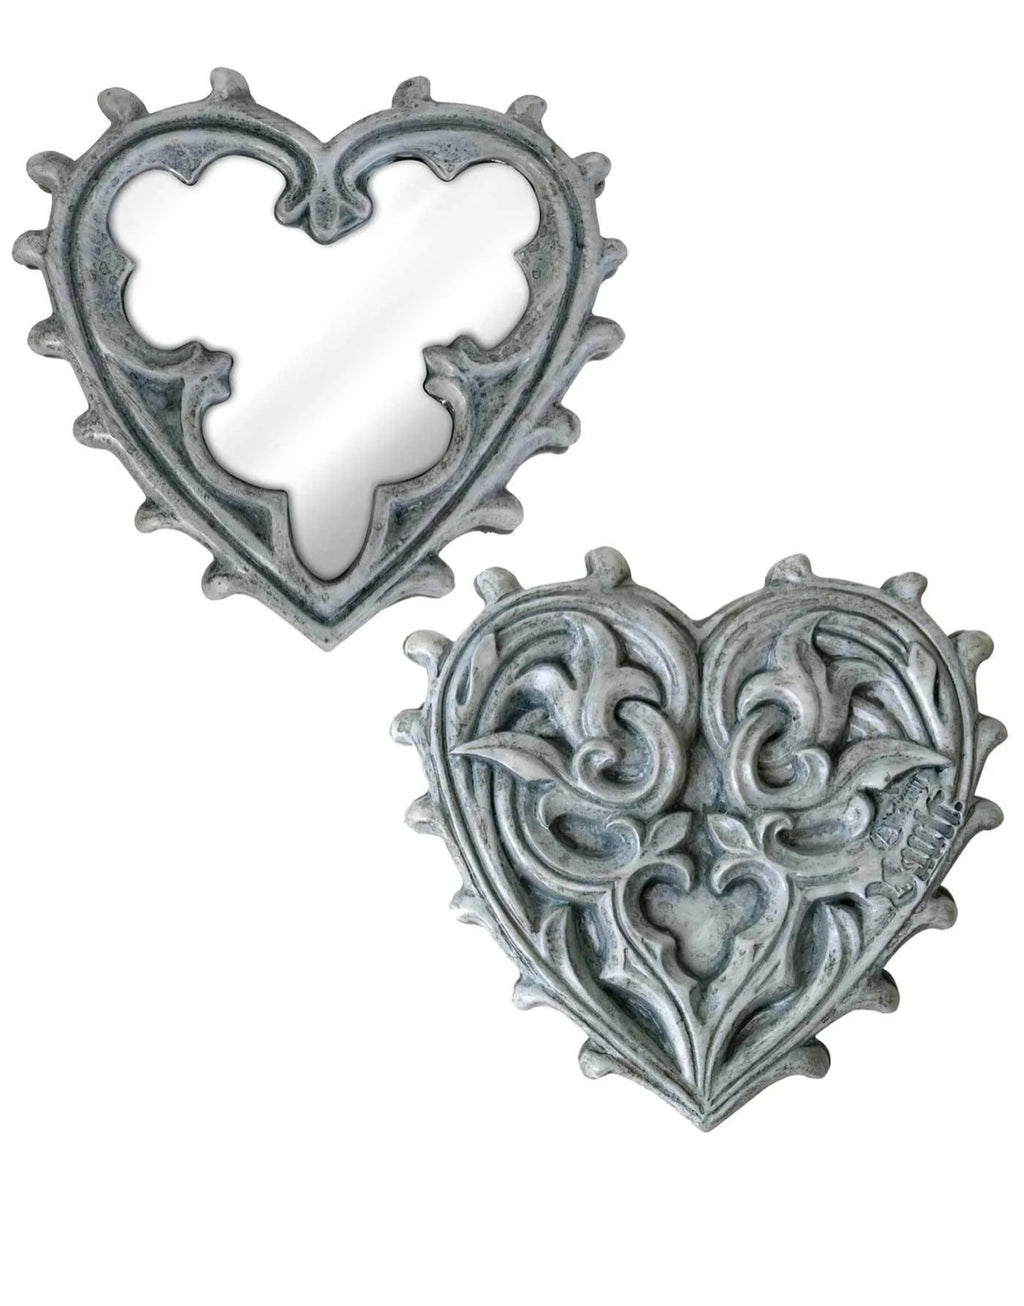 Medieval gothic heart compact mirror